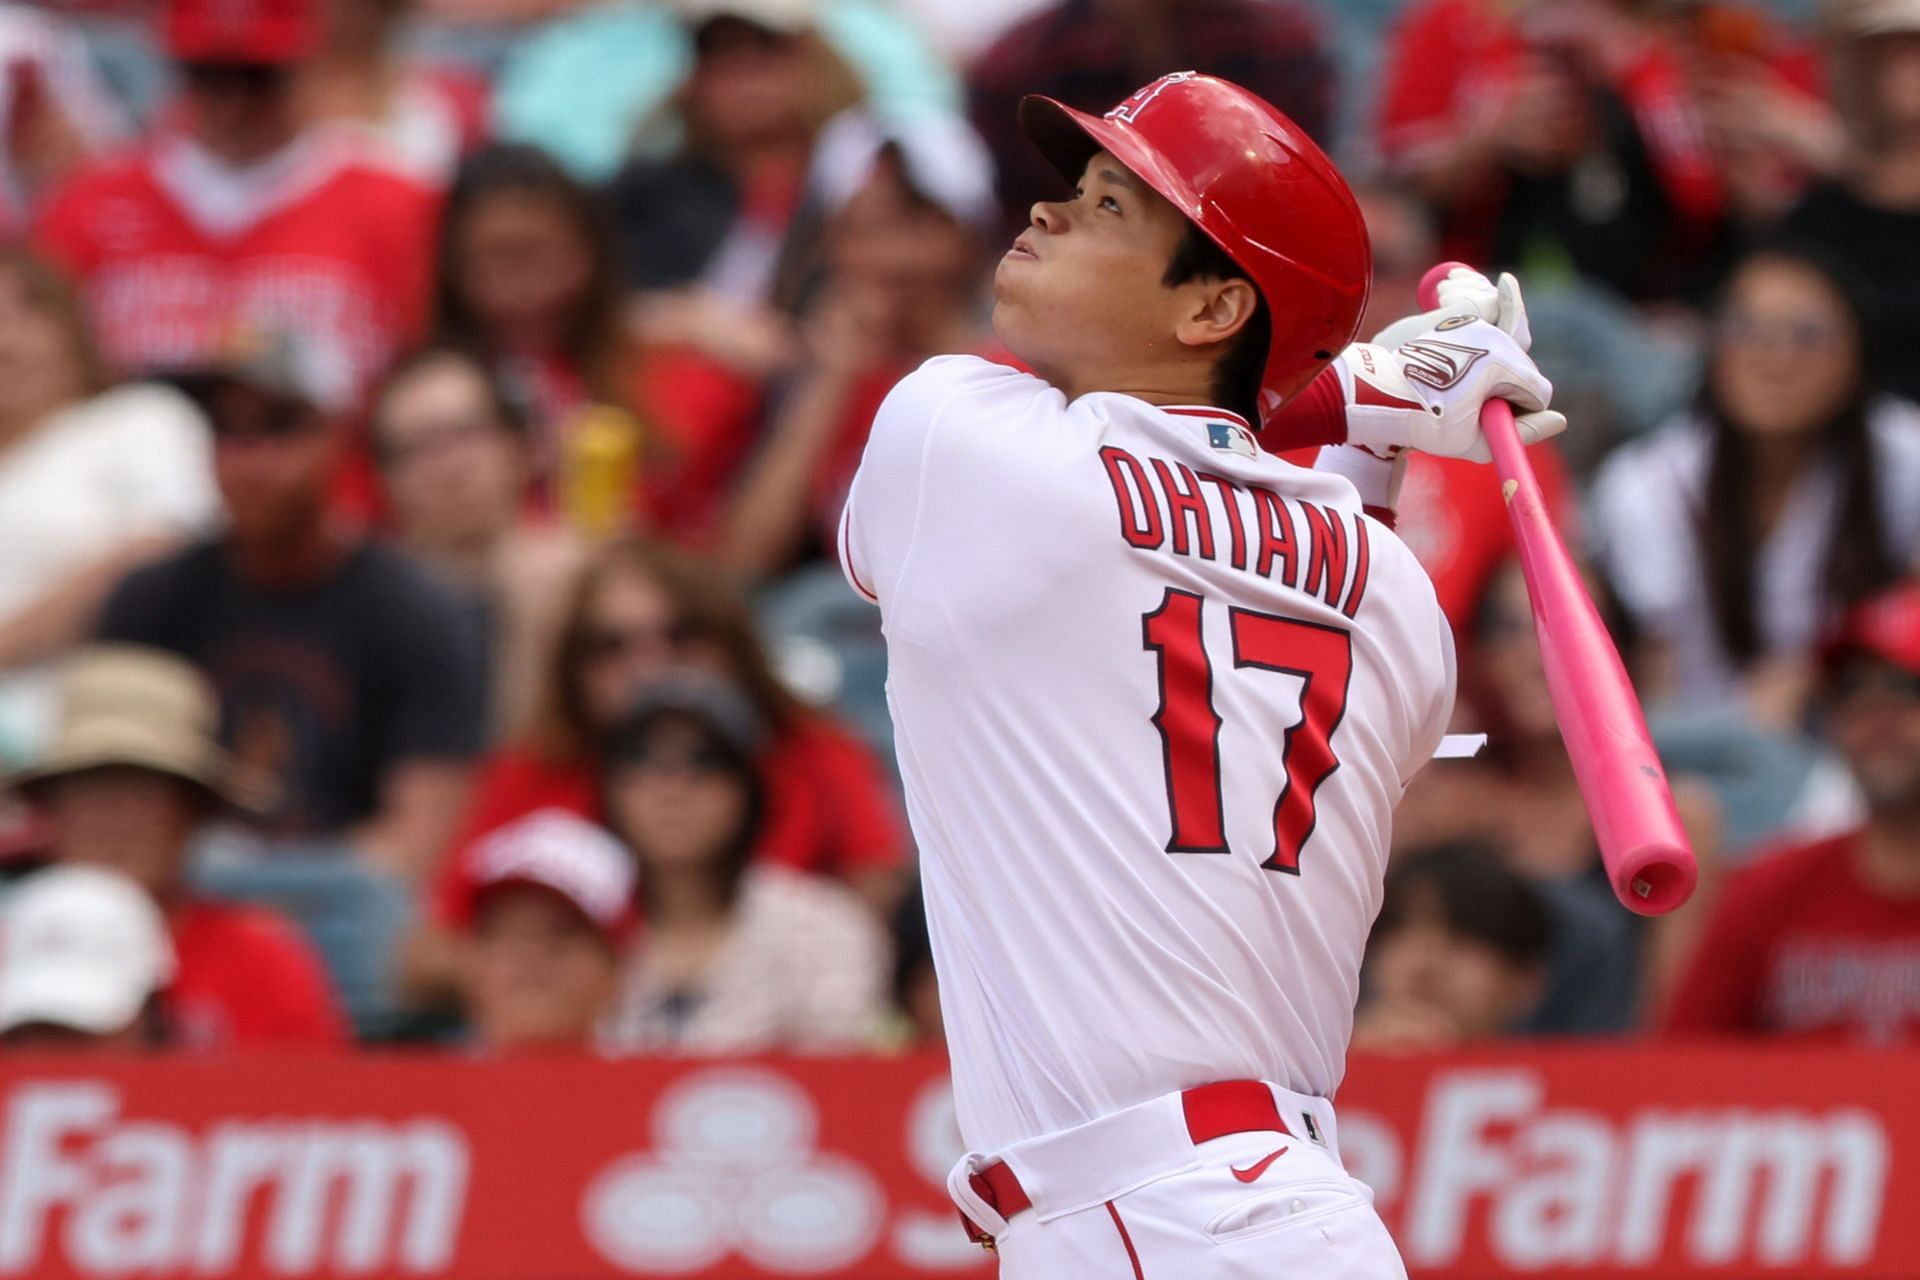 Shohei Ohtani of the Los Angeles Angels hits in the fifth inning against the Washington Nationals.